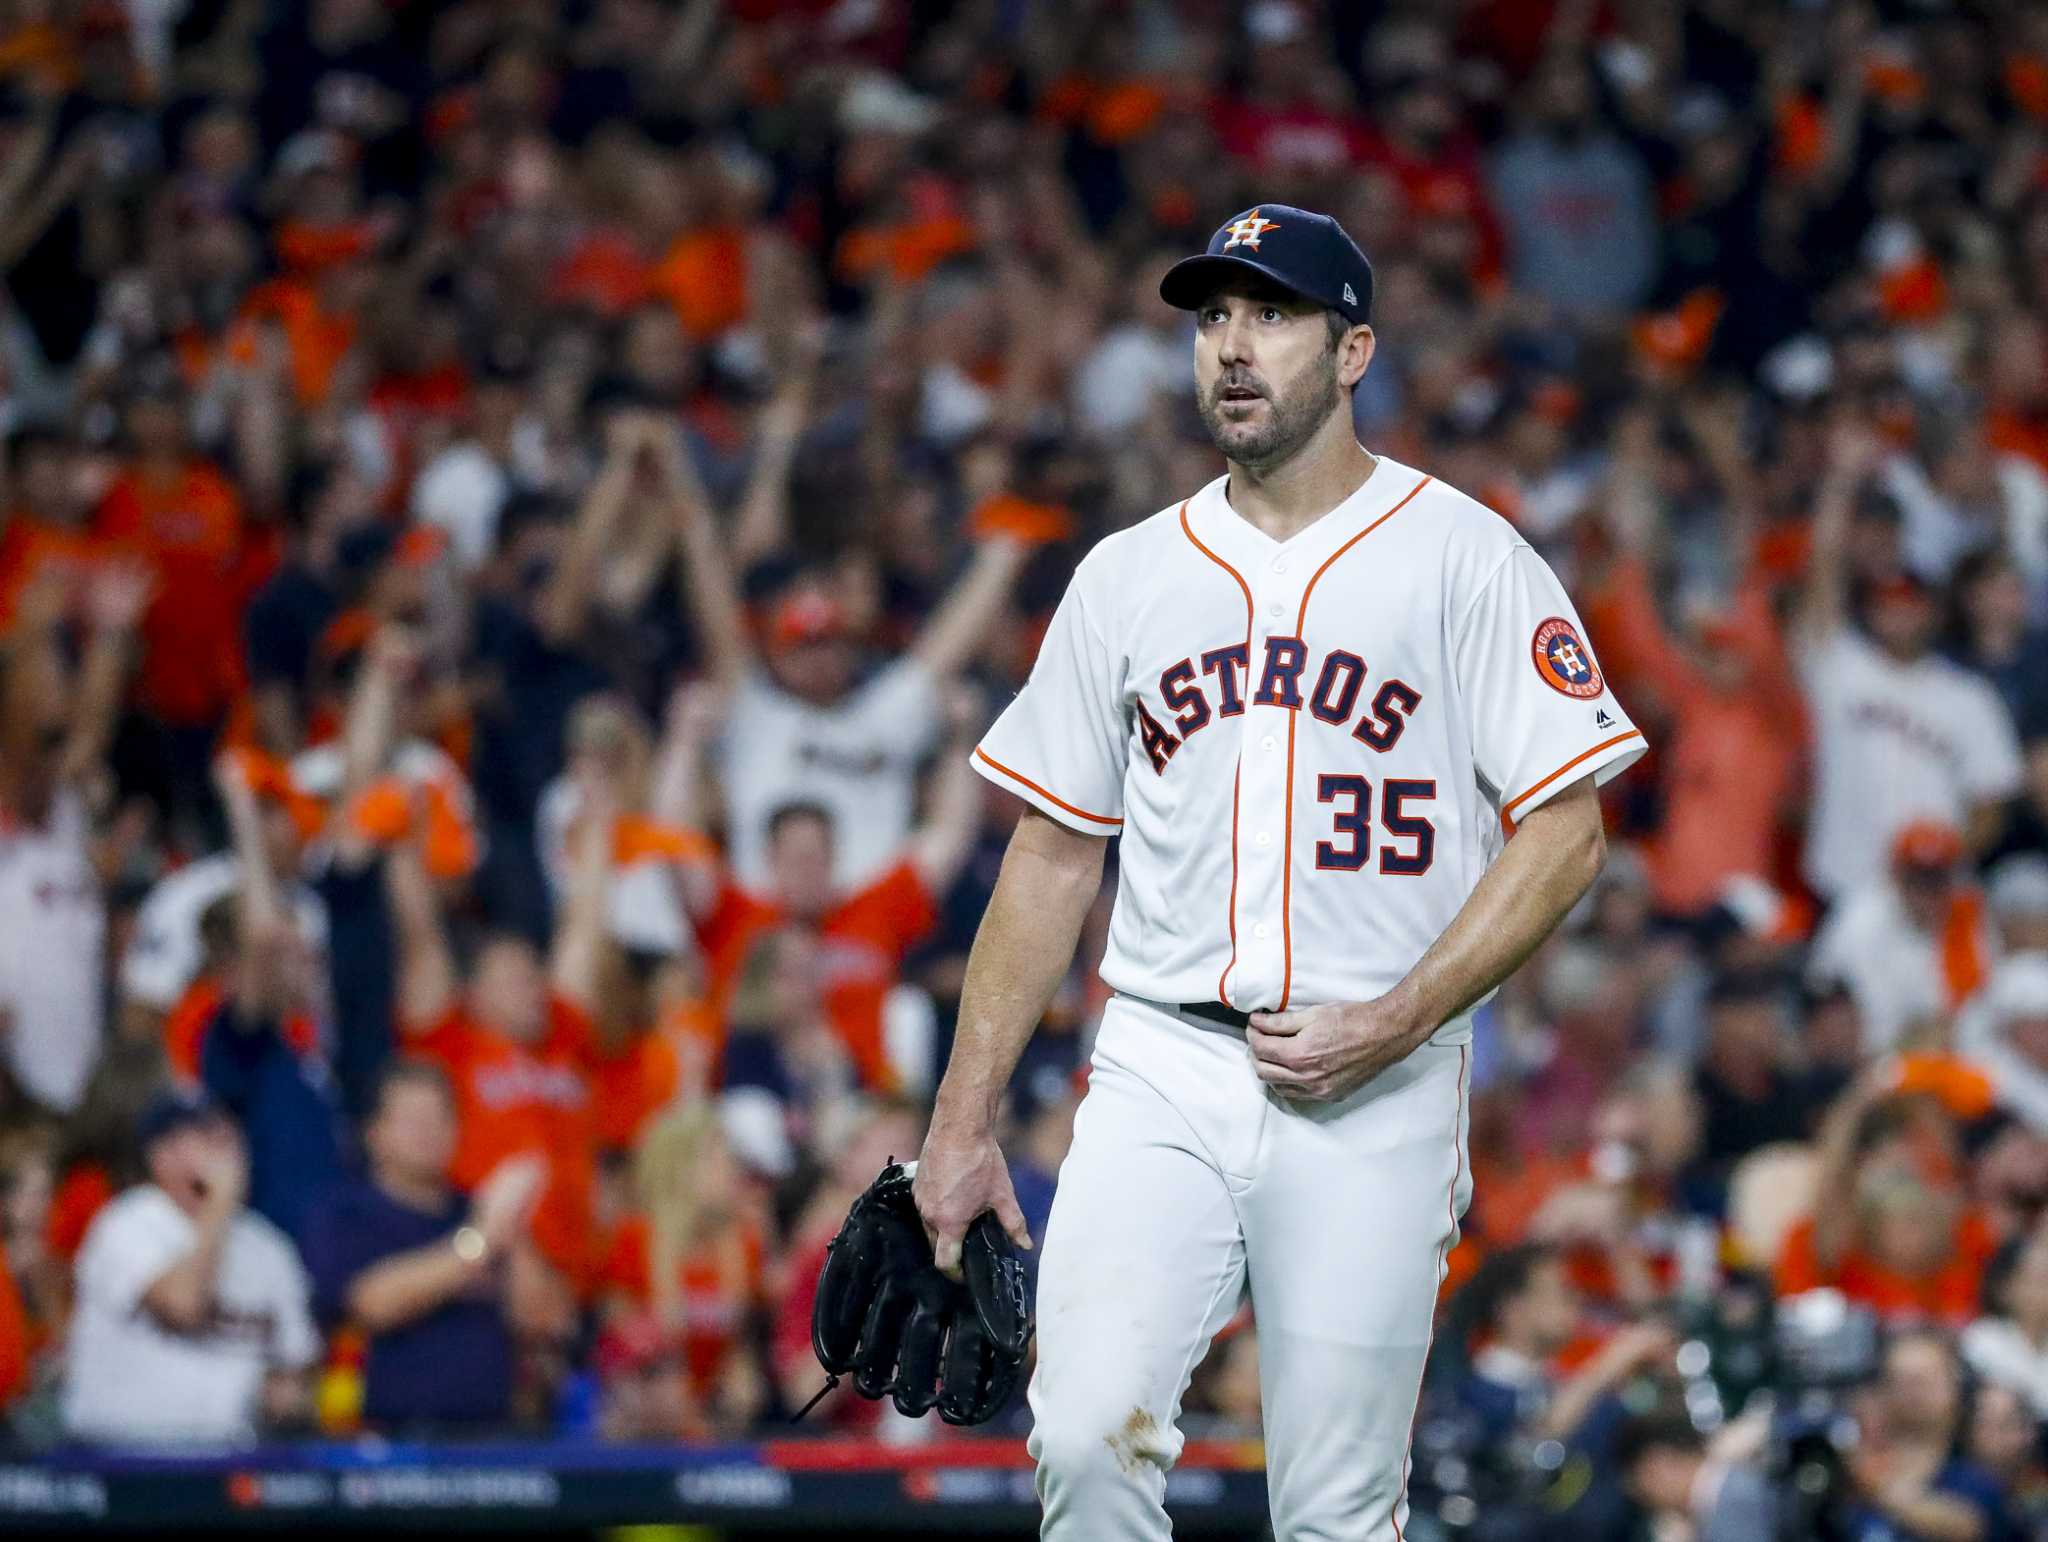 Houston Astros: When Mike Fiers refused to be intimidated by threats after  exposing the 2017 Houston Astros sign-stealing scandal